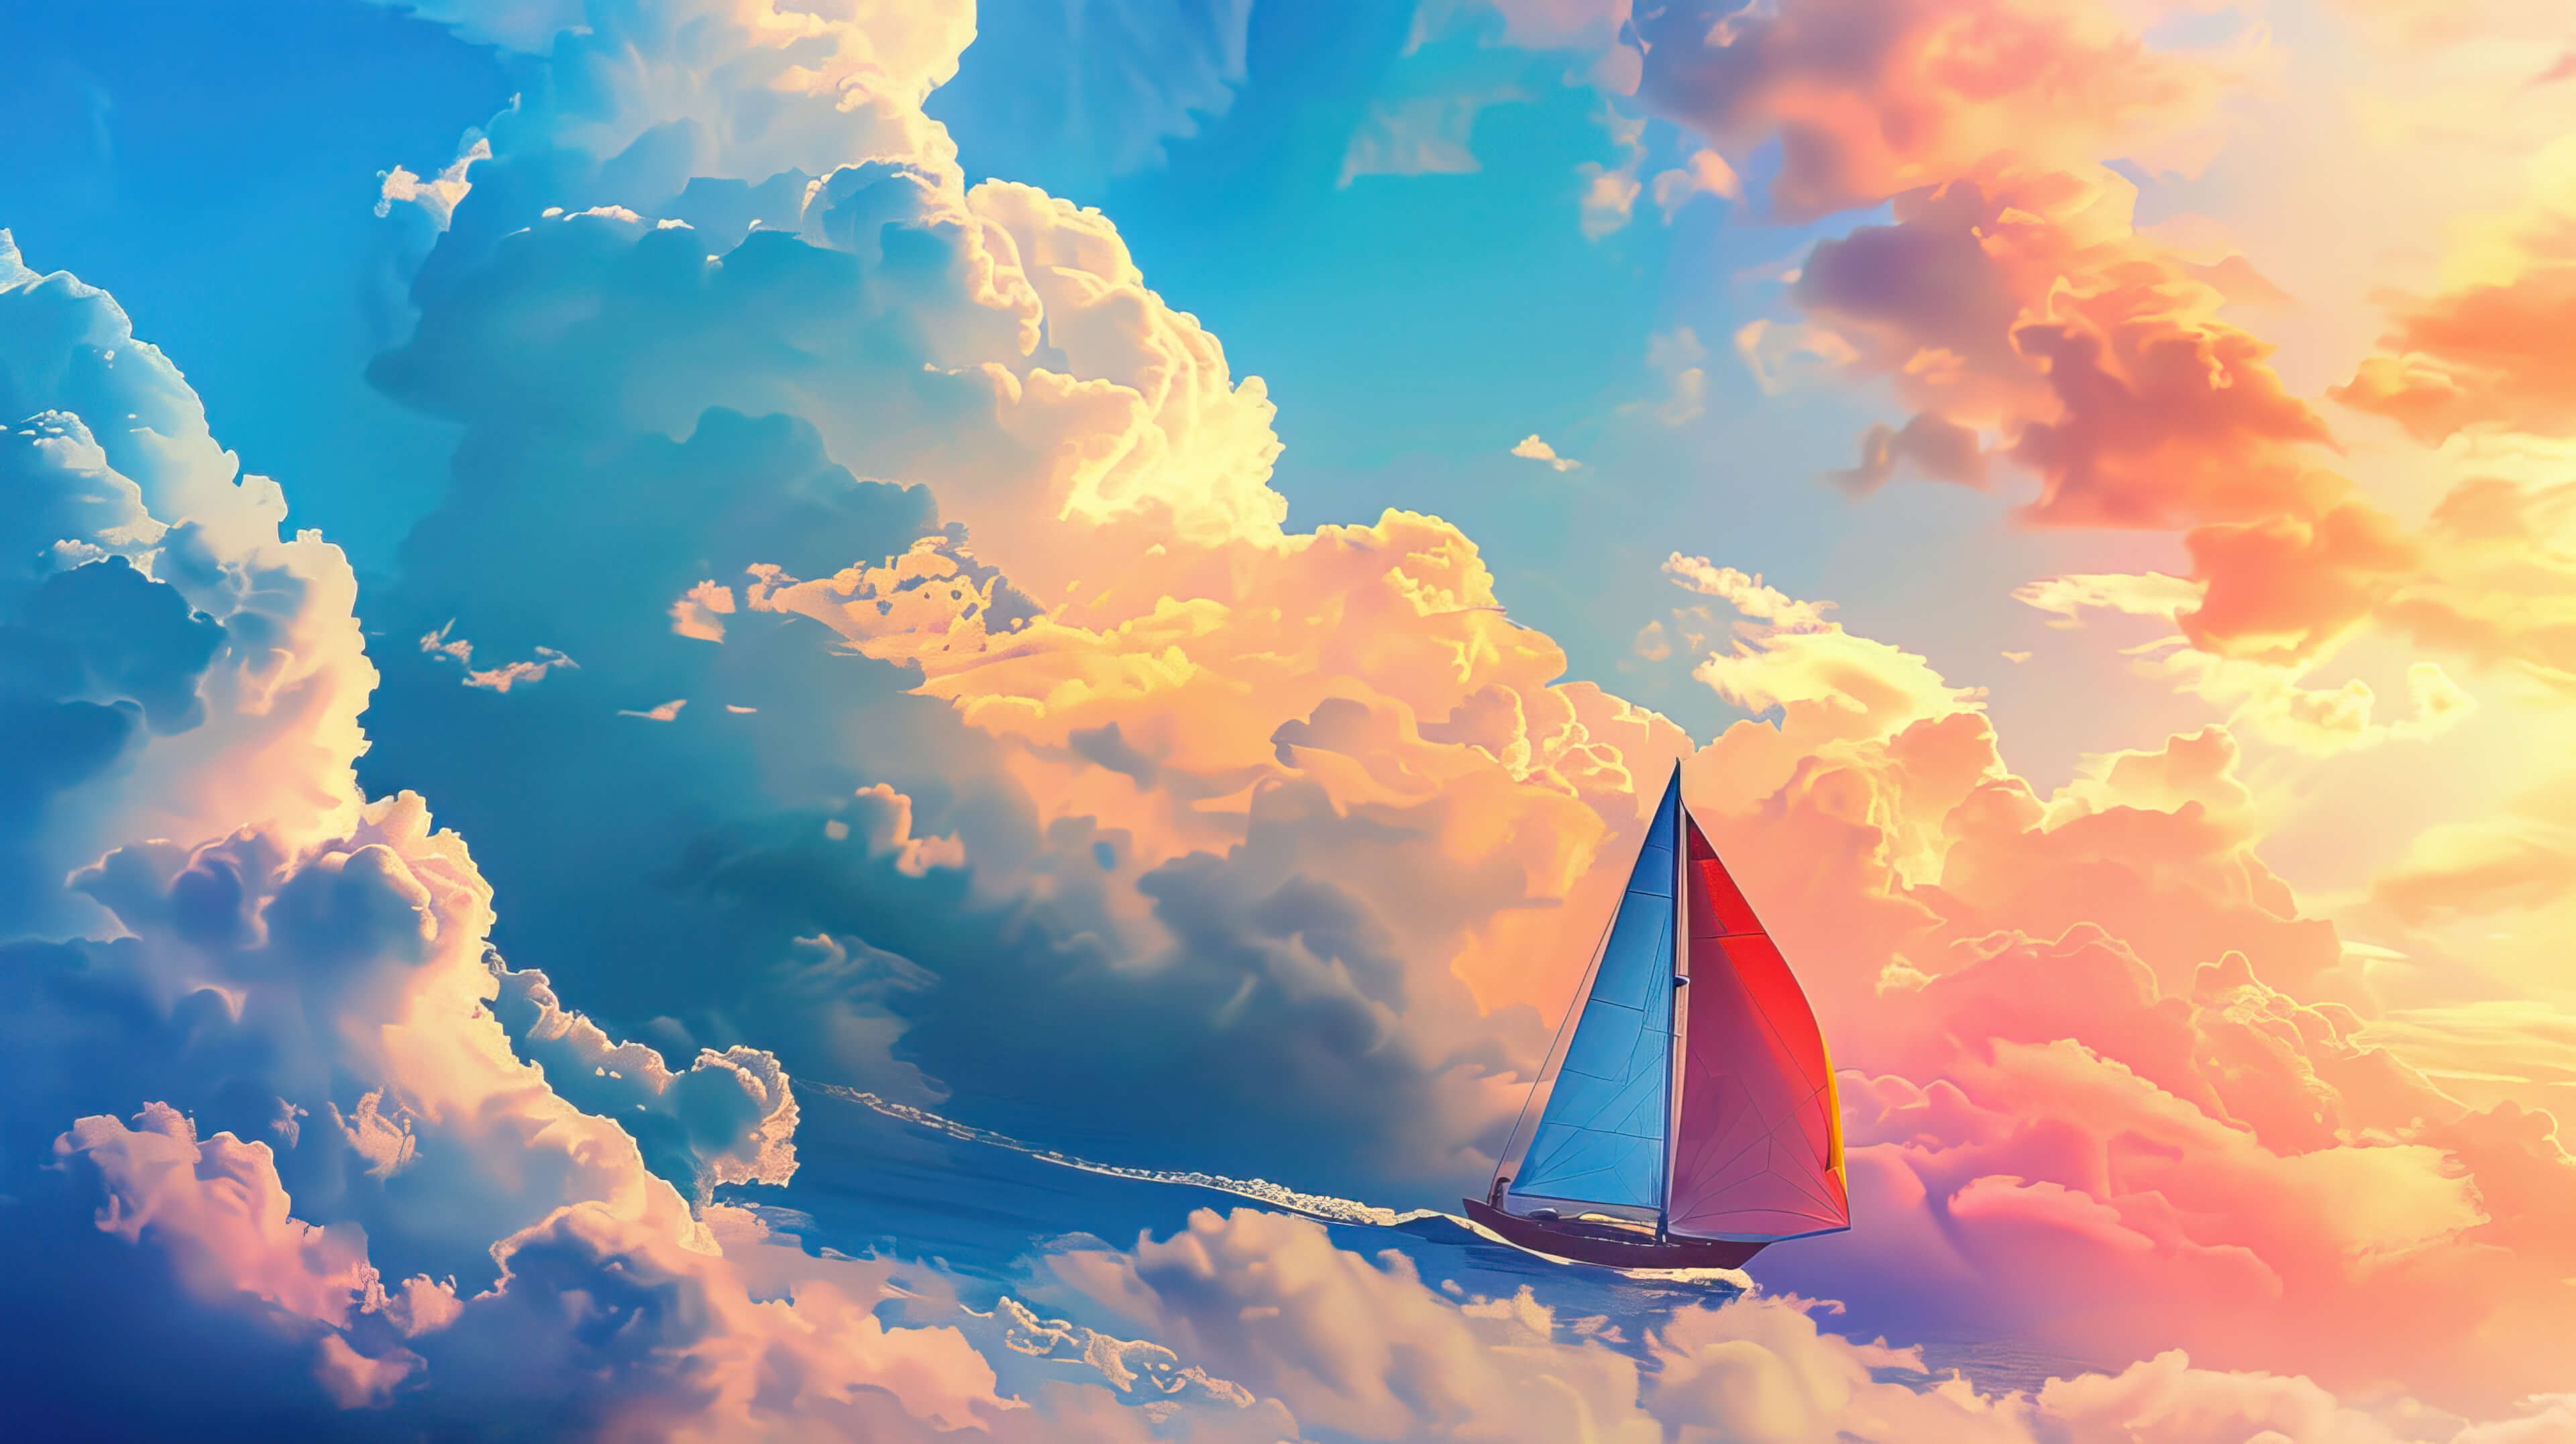 A magical wallpaper featuring a sailboat gliding through the sky its vibrant sails enhancing the whimsical atmosphere amidst fluffy clouds